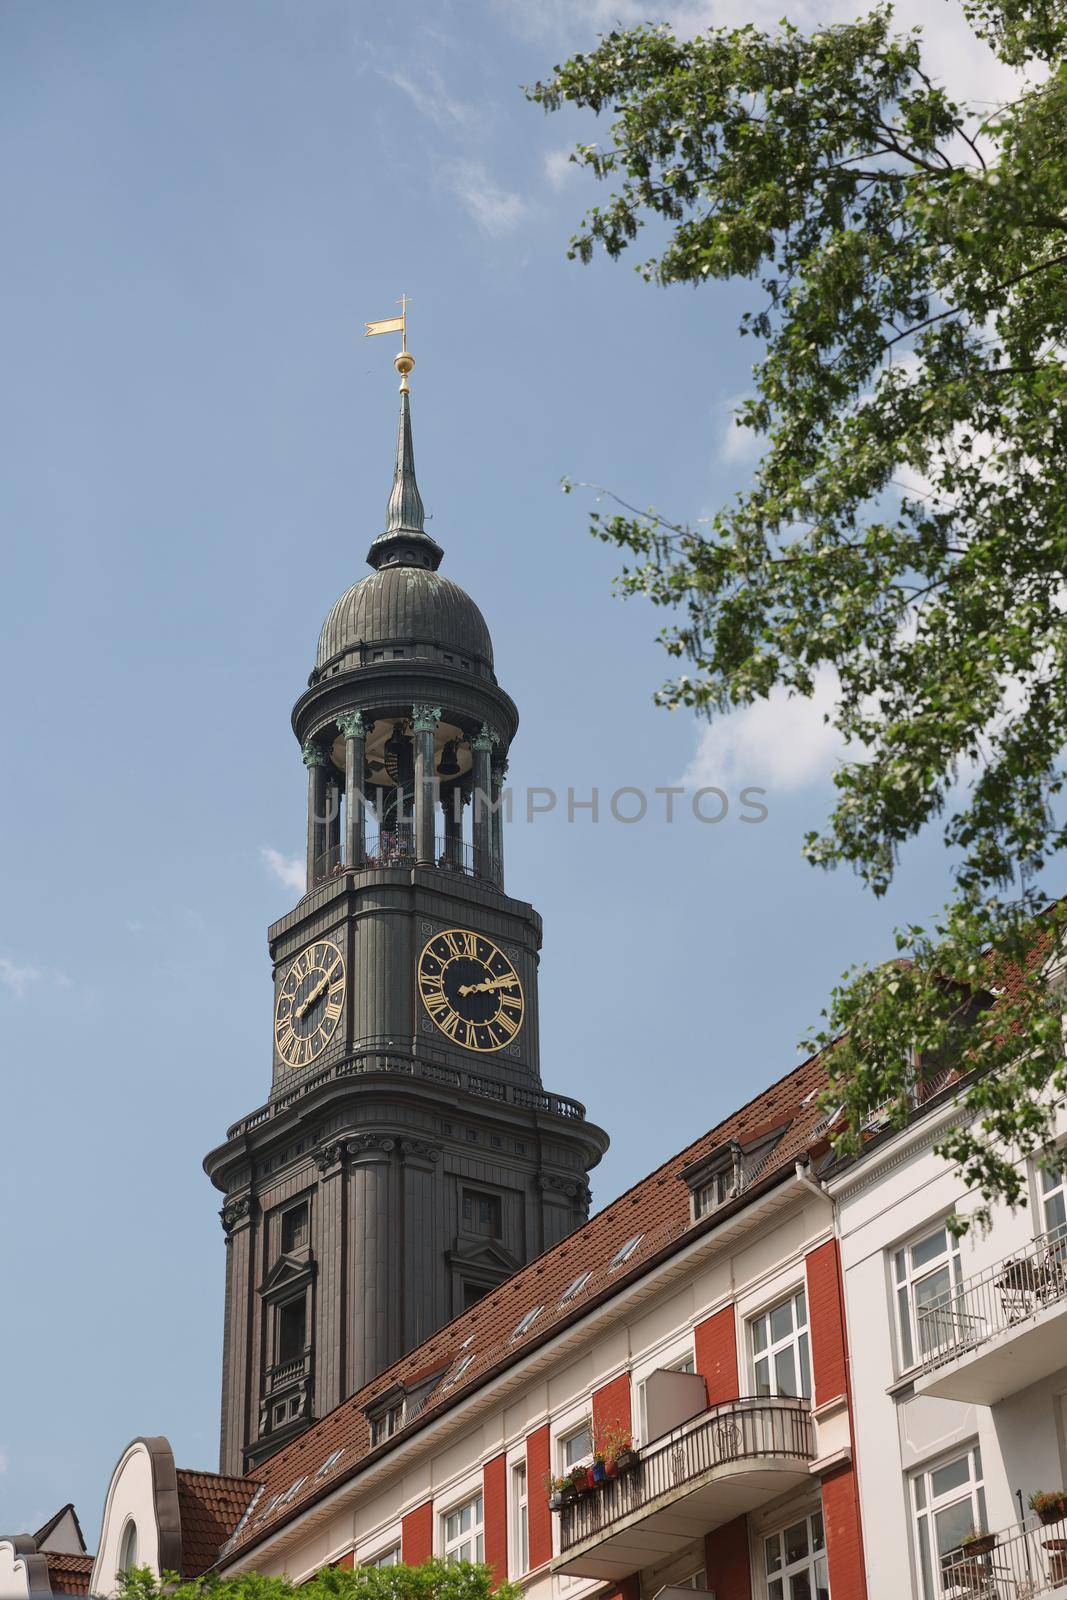 St. Michael's Church in Hamburg, Germany, (German: Hauptkirche Sankt Michaelis, colloquially called Michel) is one of Hamburg's five Lutheran main churches and the most famous church in the city.